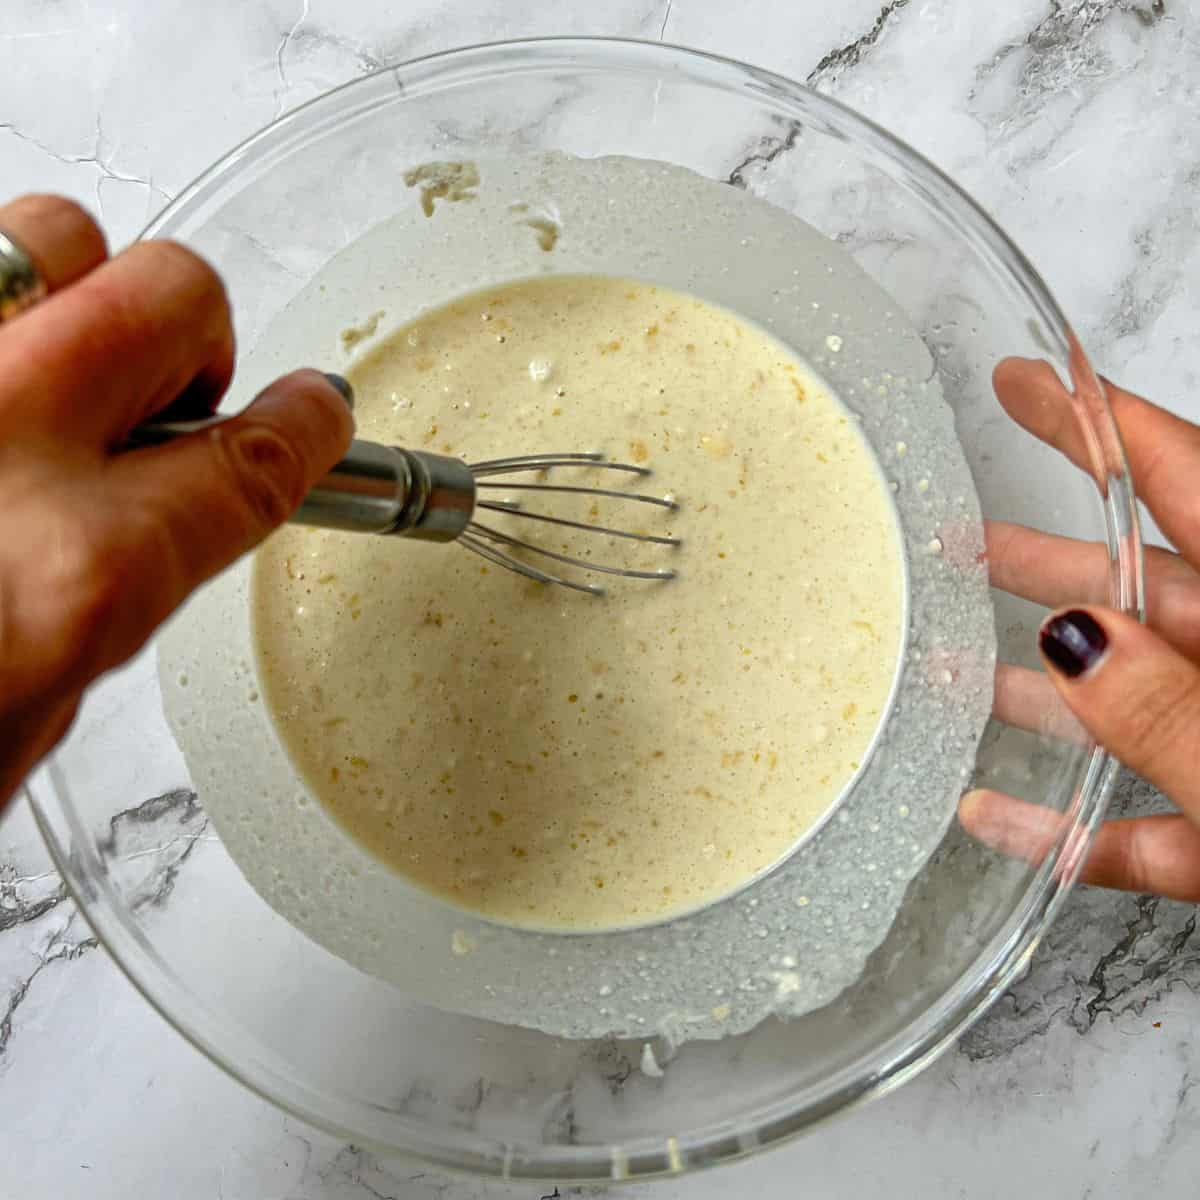 Pancake ingredients being mixed with a hand whisk in a bowl.